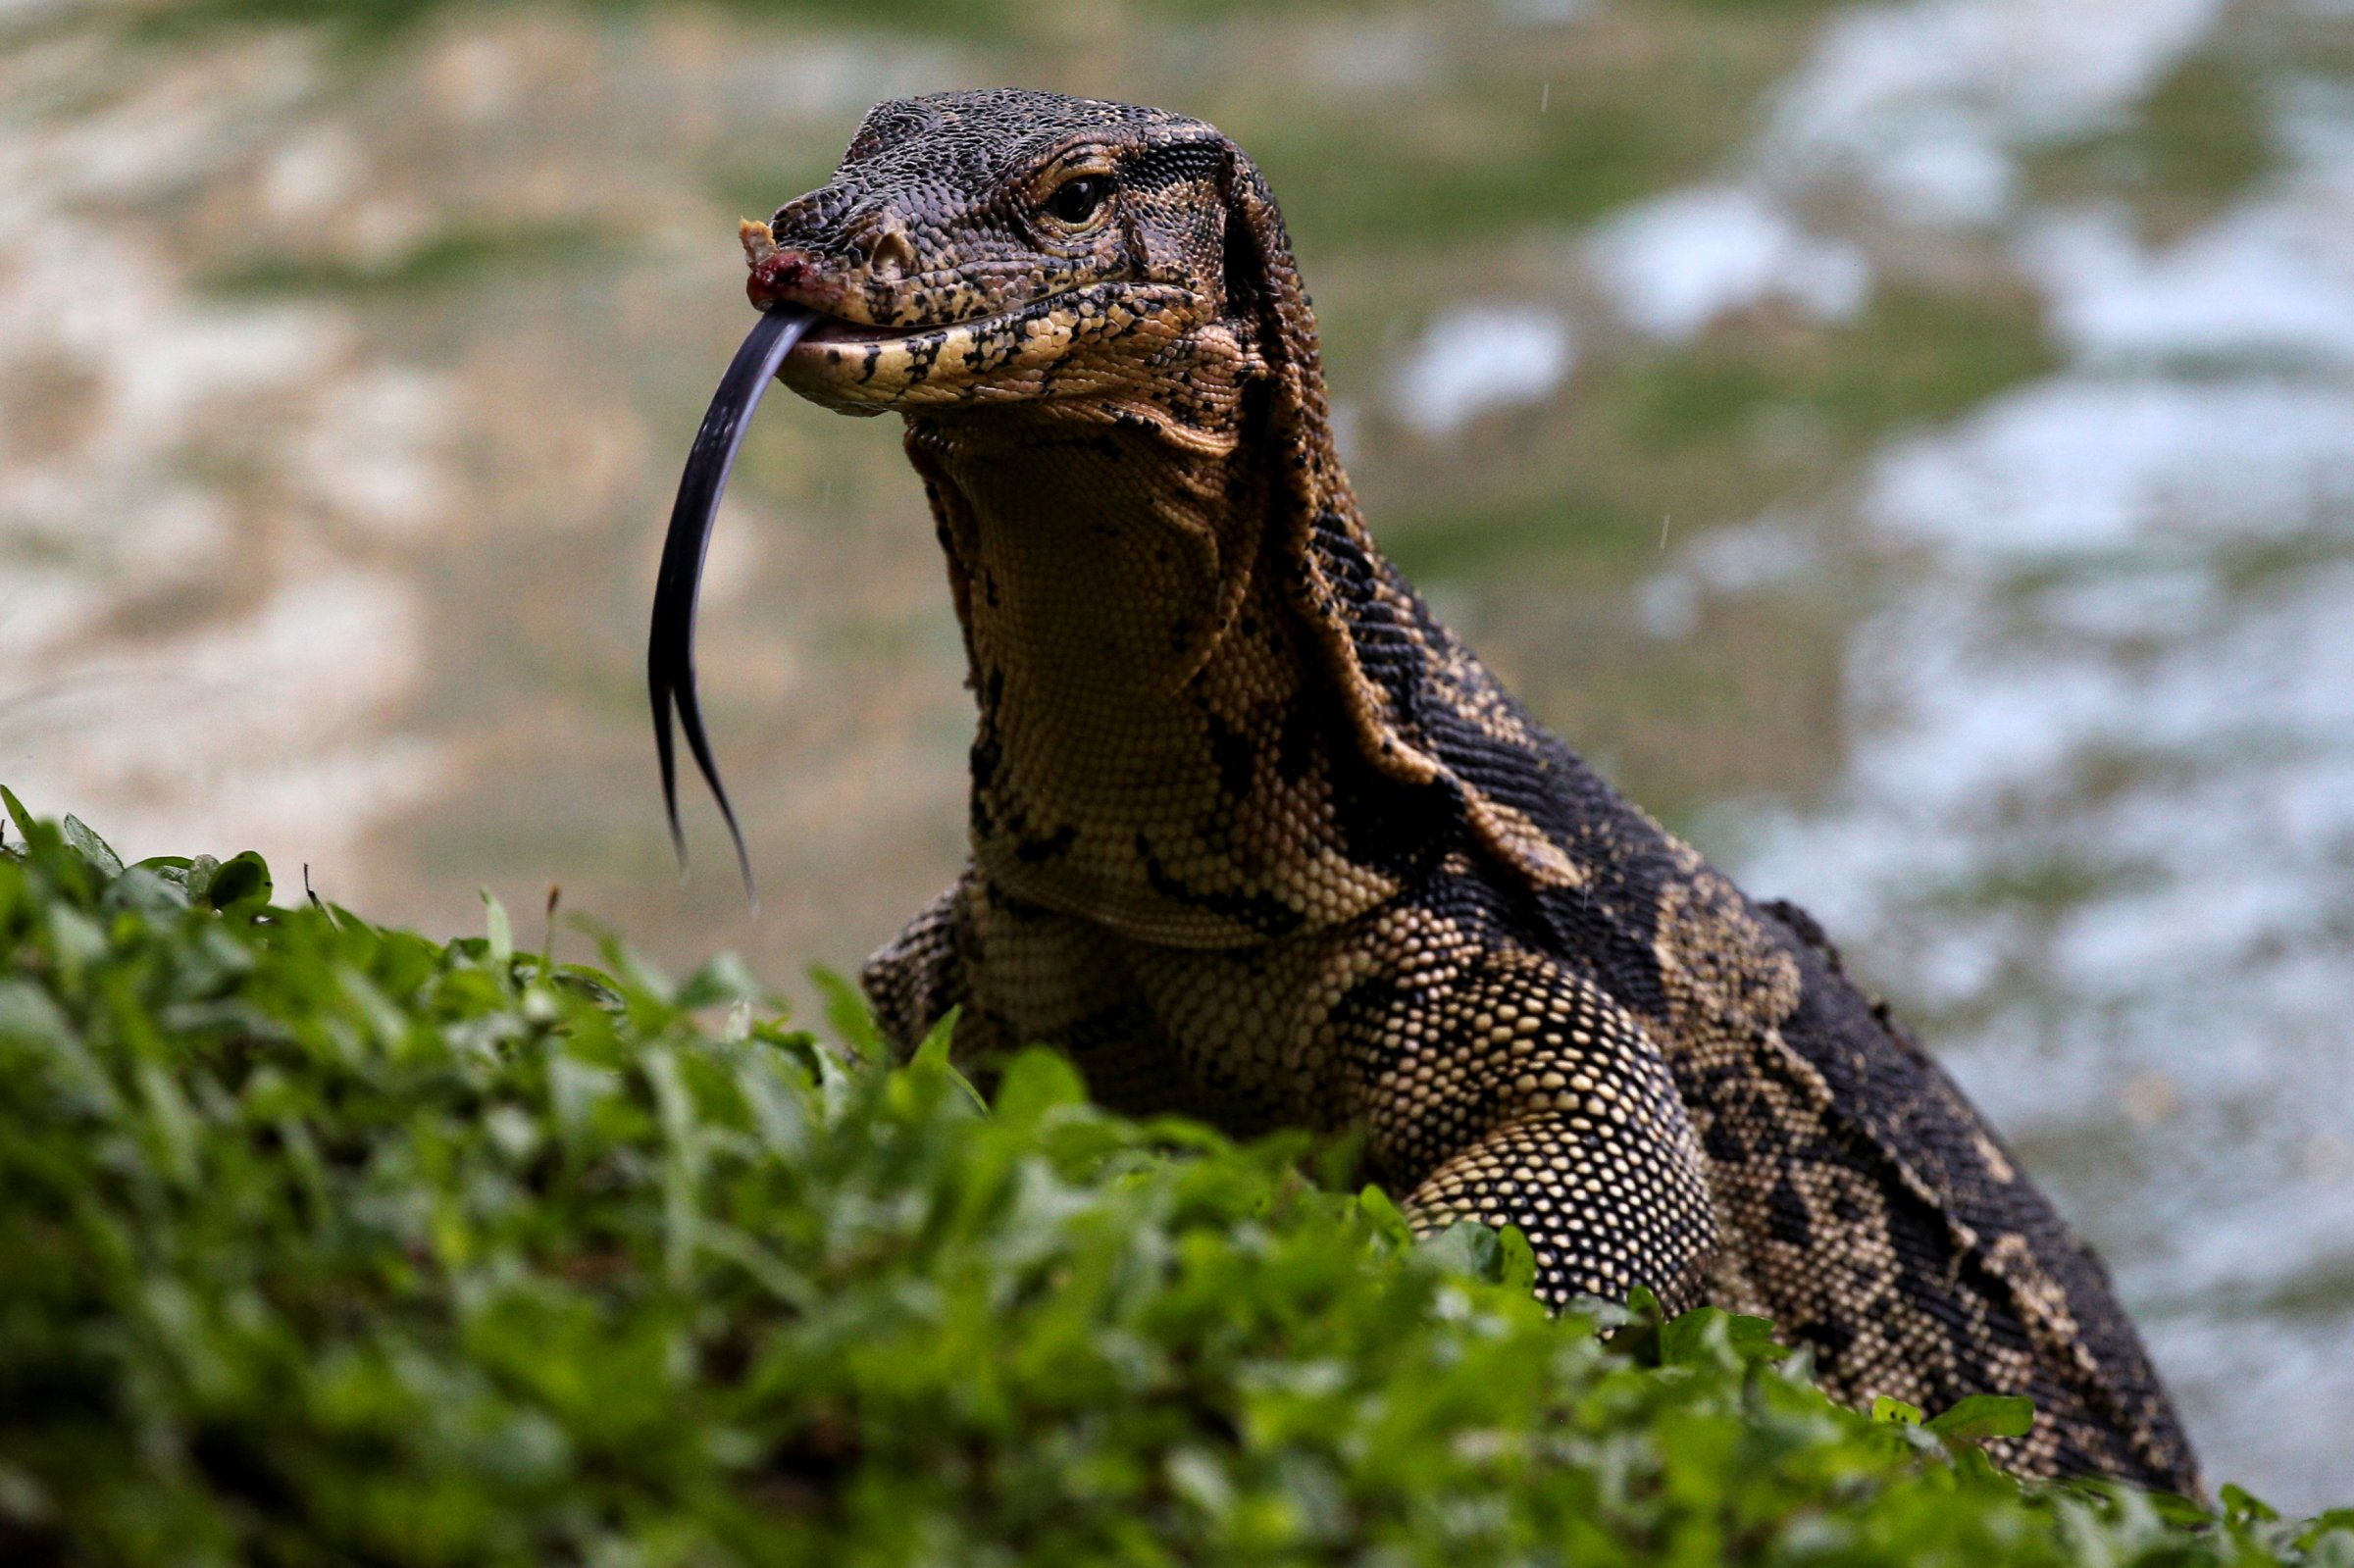 A monitor lizard is pictured at Lumpini park in Bangkok